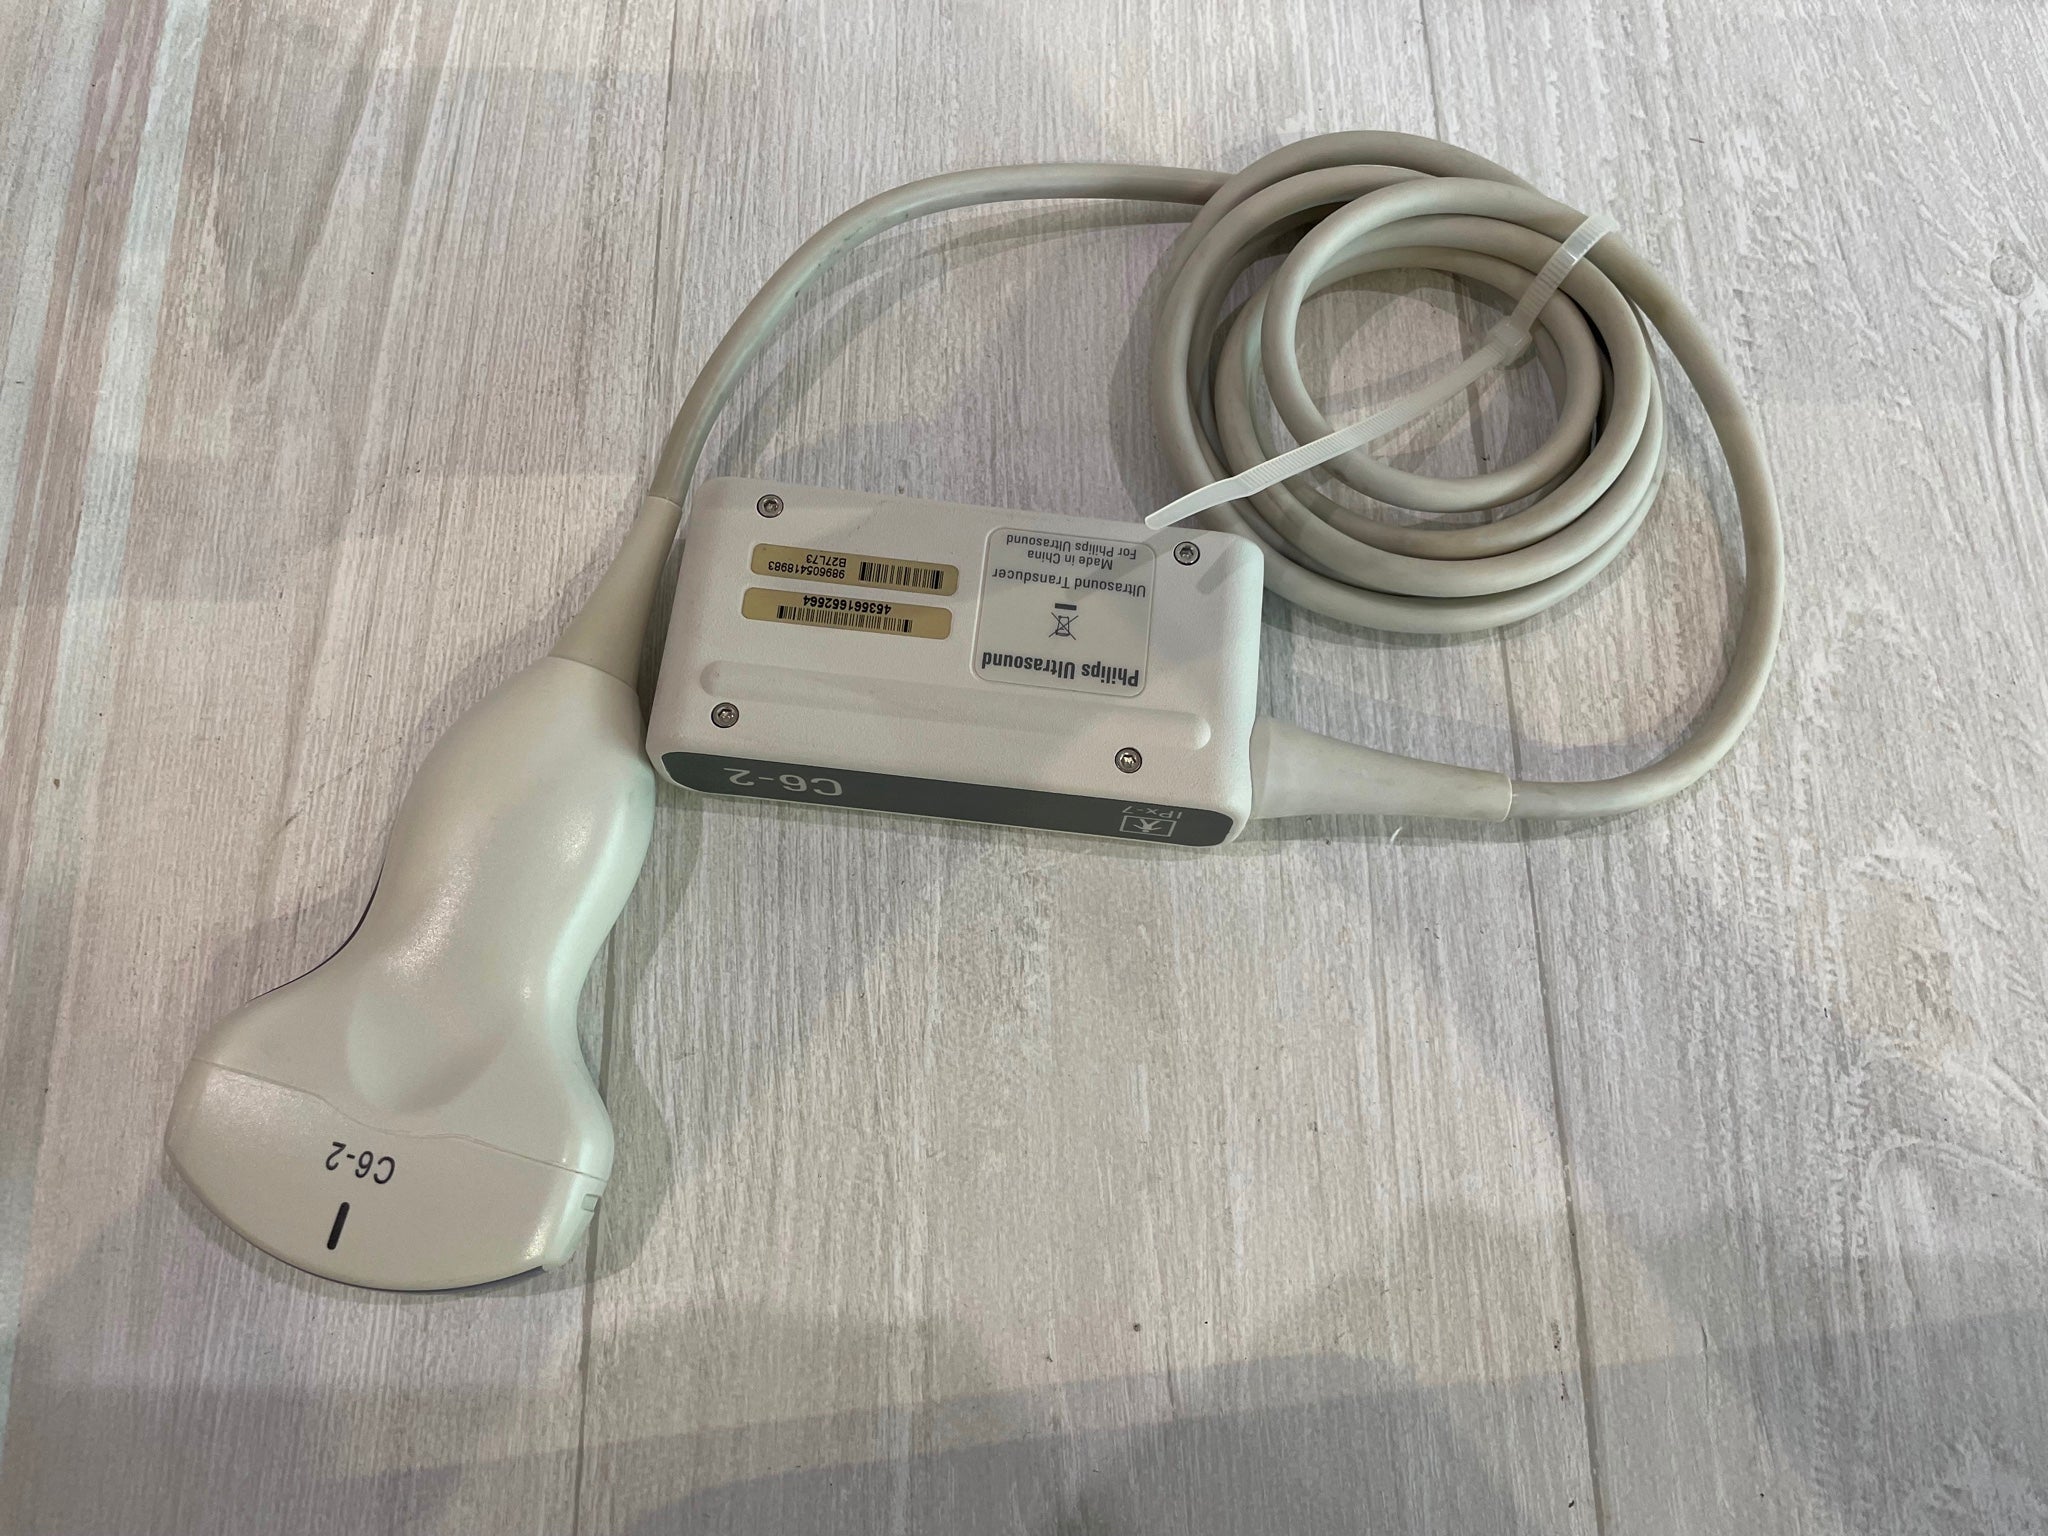 Philips C6-2 Compact Ultrasound Probe Transducer DIAGNOSTIC ULTRASOUND MACHINES FOR SALE